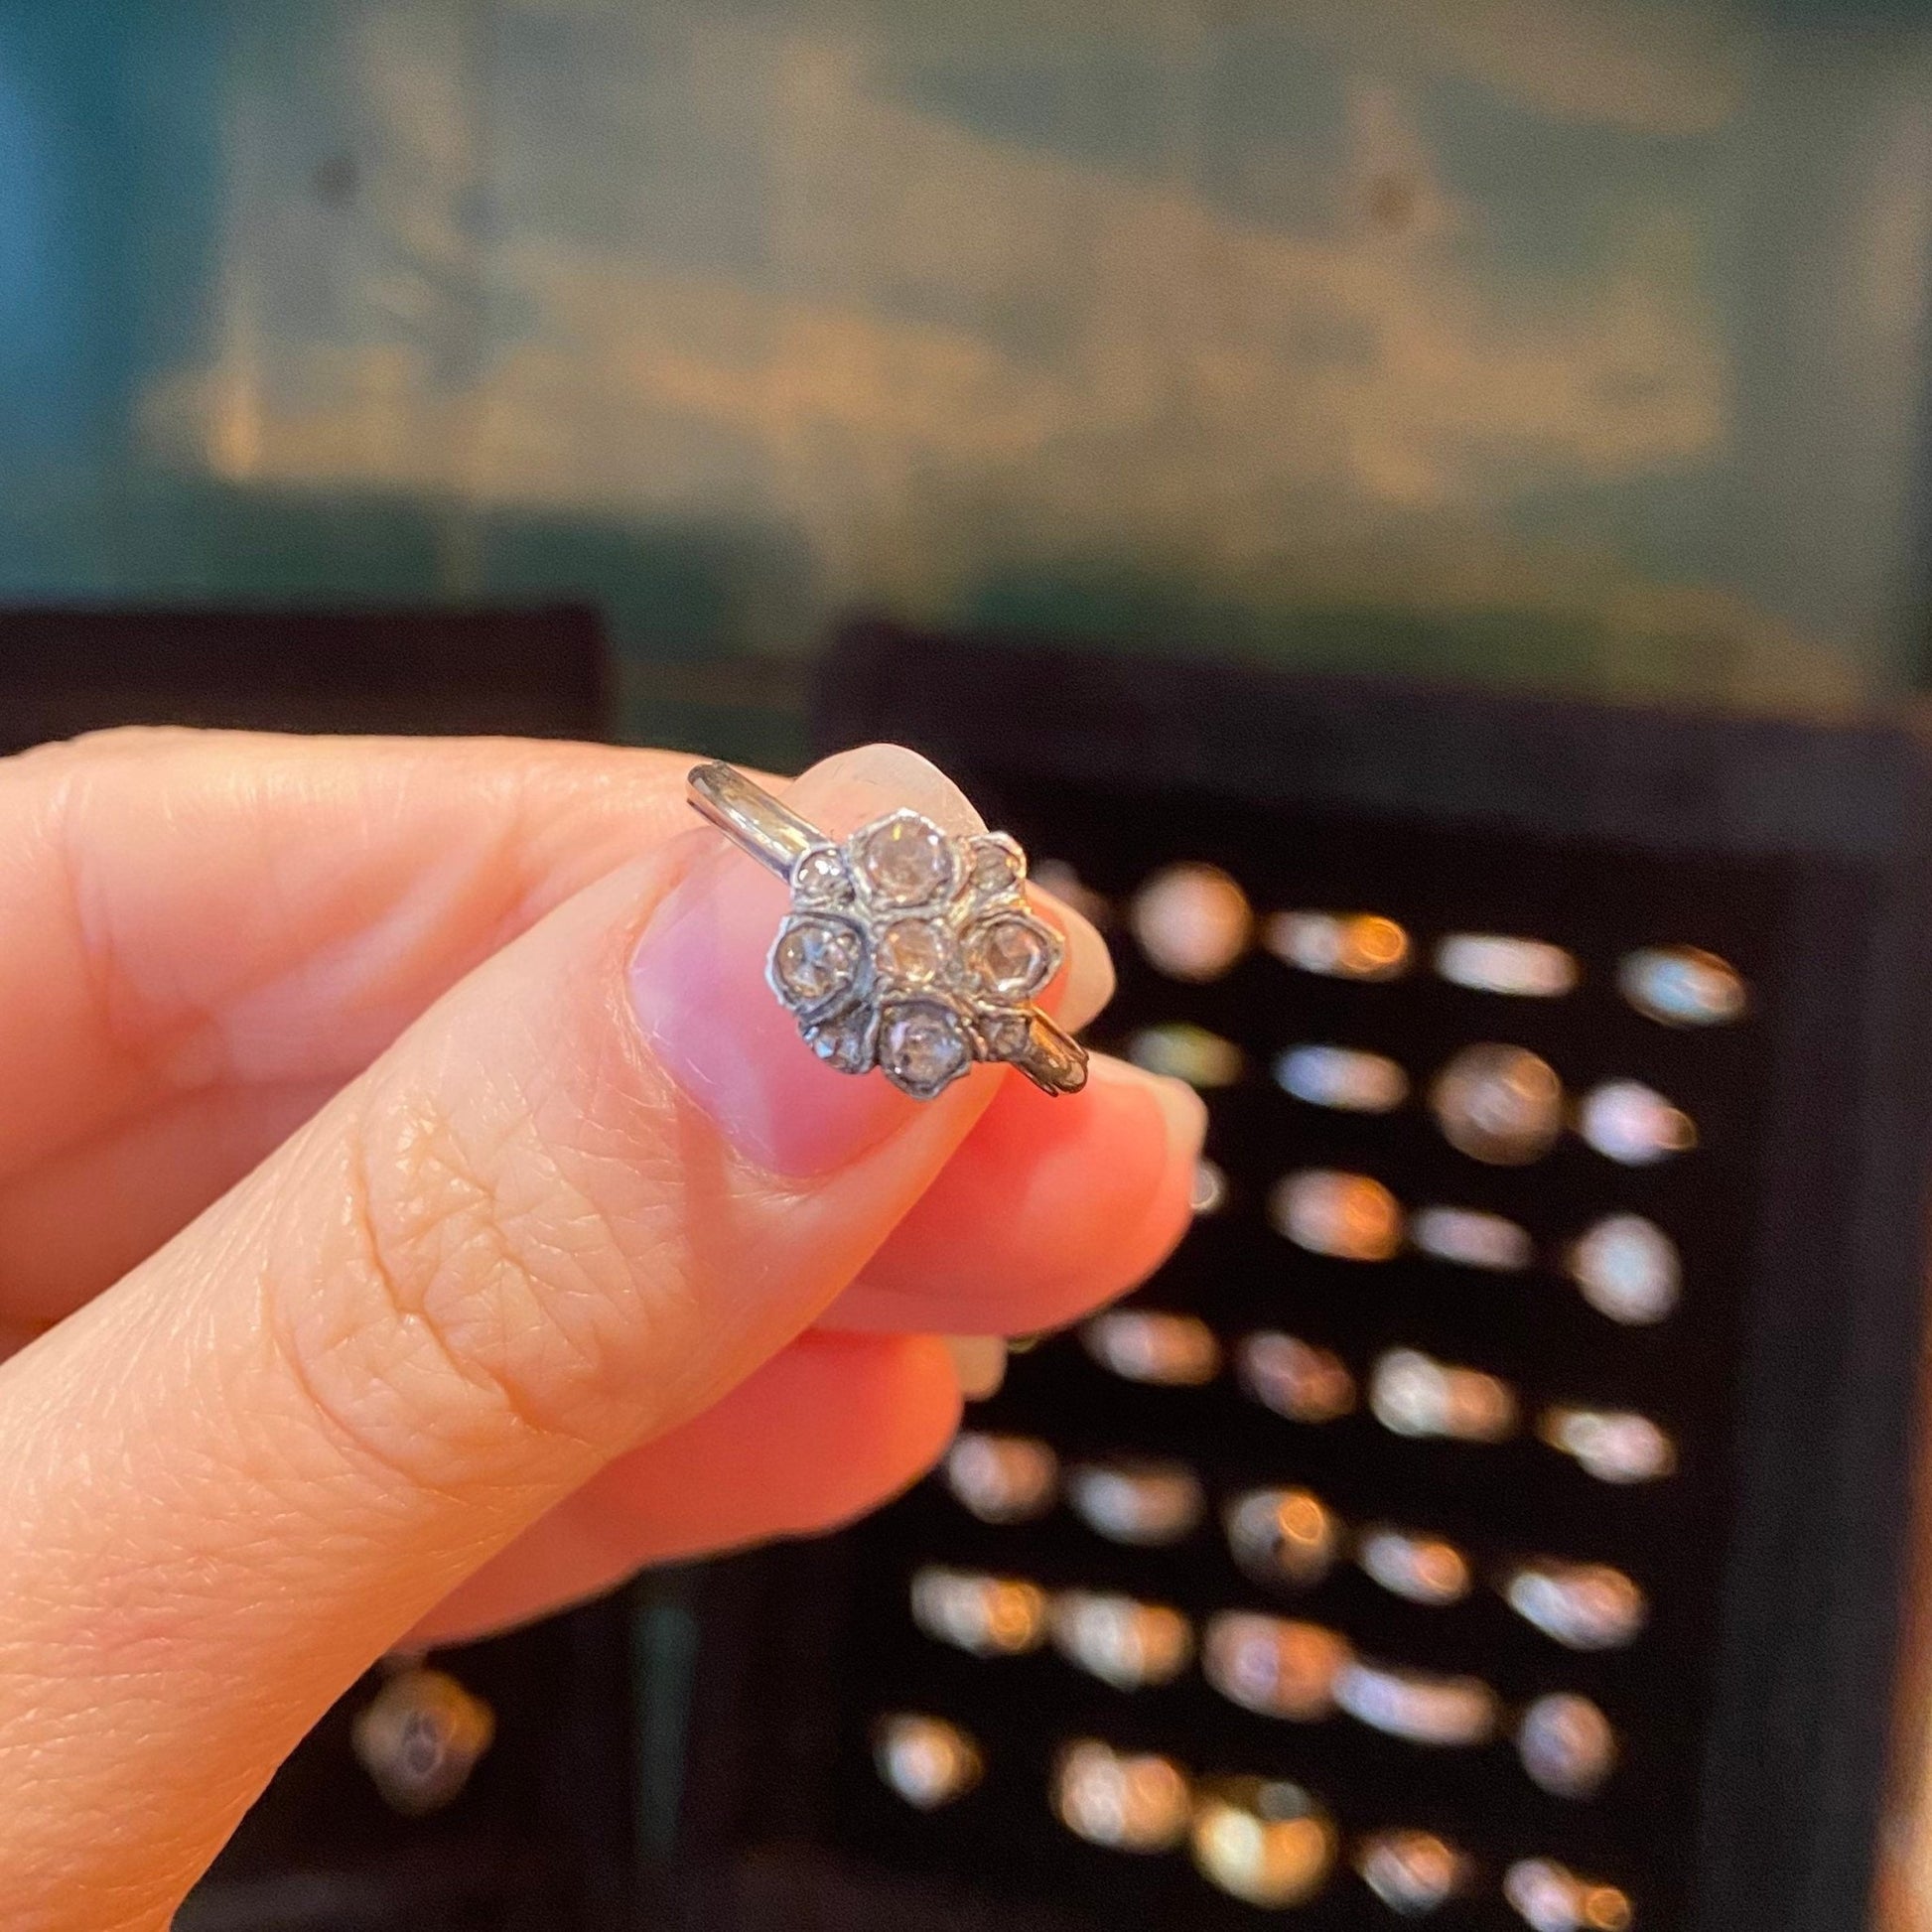 Antique diamond ring set with old cut diamonds, a georgian diamond ring. - Collected